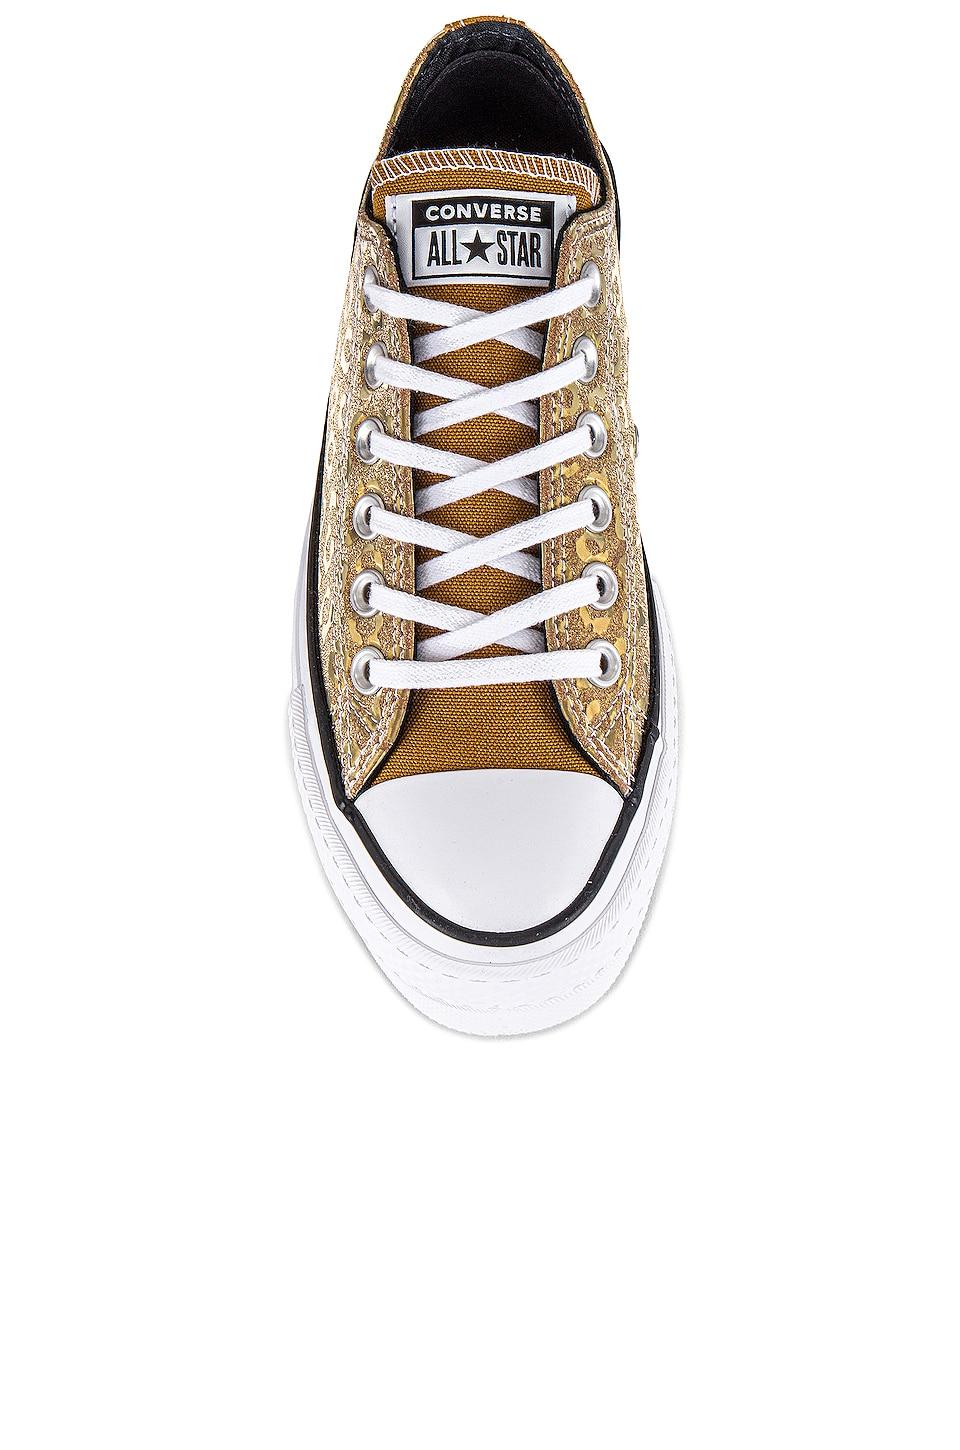 Chuck Taylor All Star Metallic Leather Low Top Sneakers | islamiyyat.com